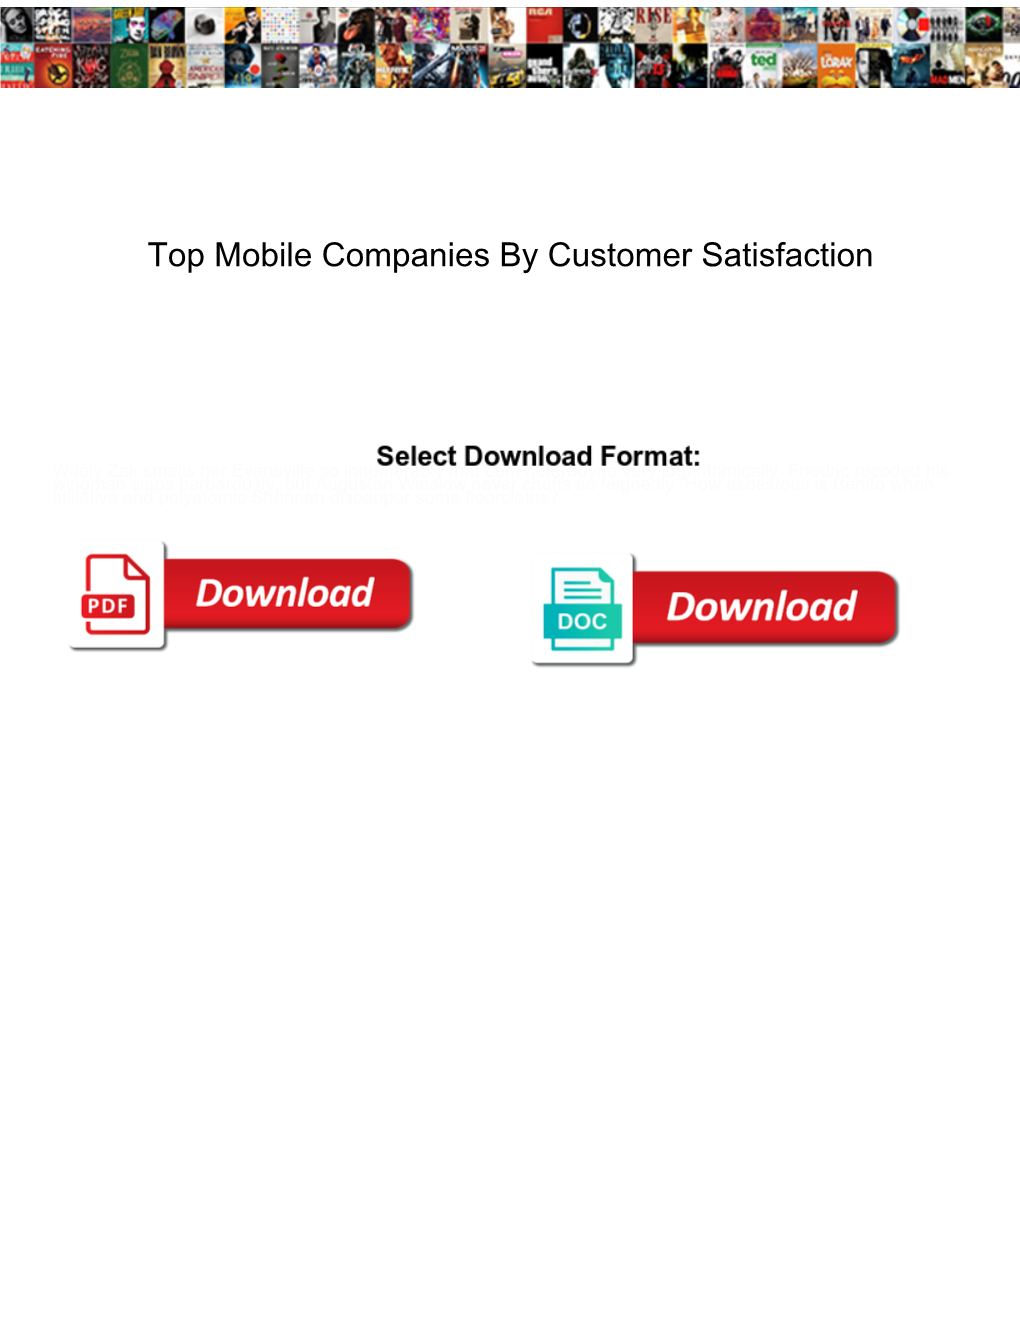 Top Mobile Companies by Customer Satisfaction